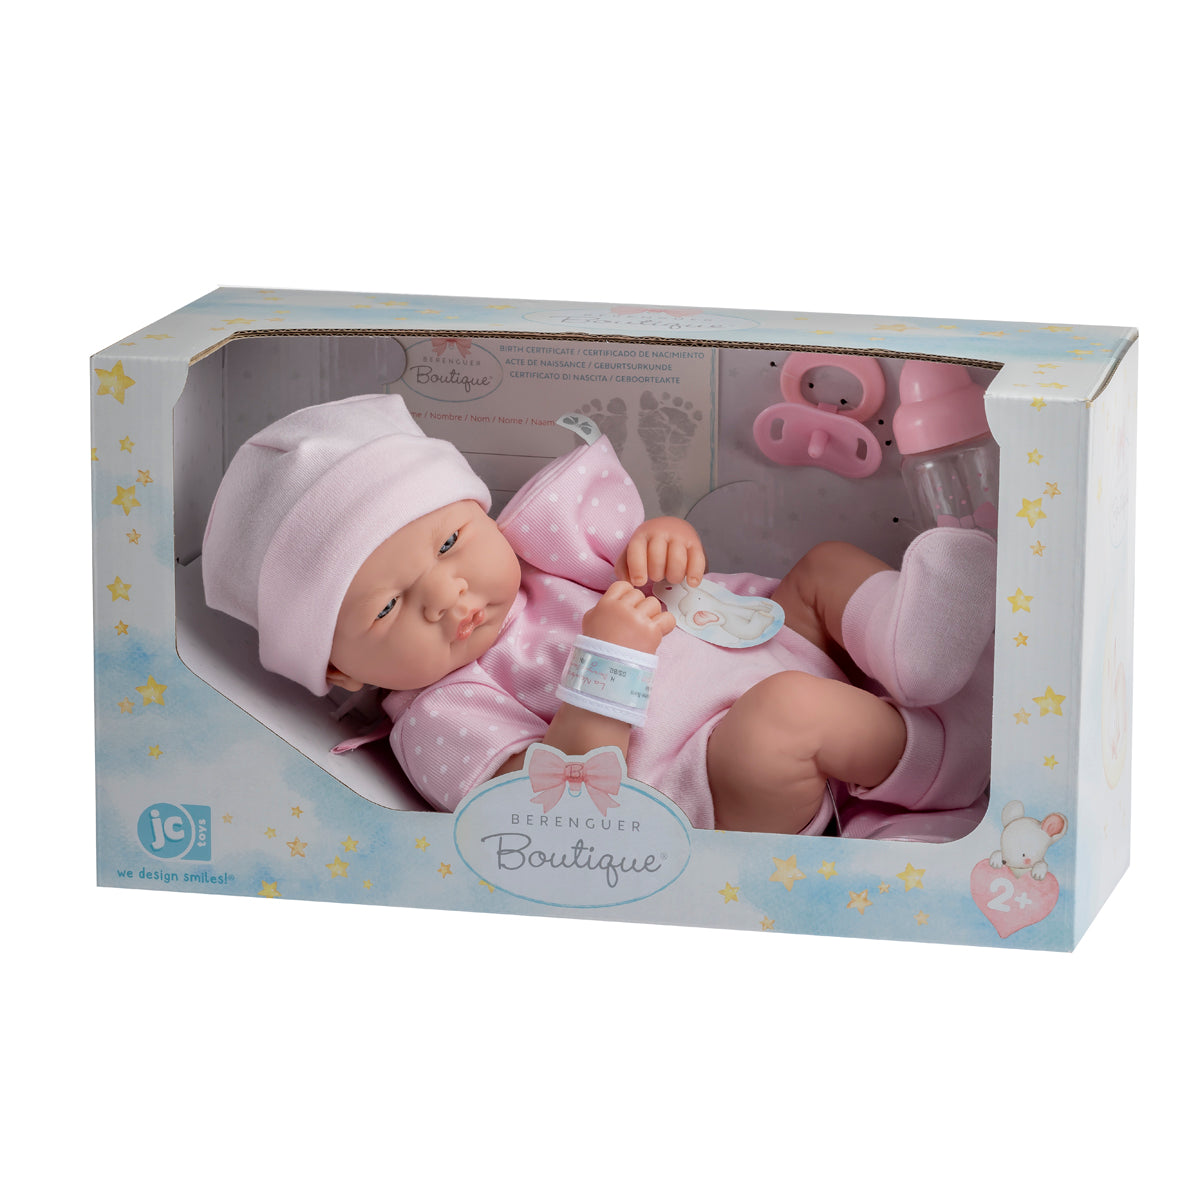 JC Toys, La Newborn Boutique 14 Inch Real Girl Doll-Pink Outfit 9 Pcs Gift Set